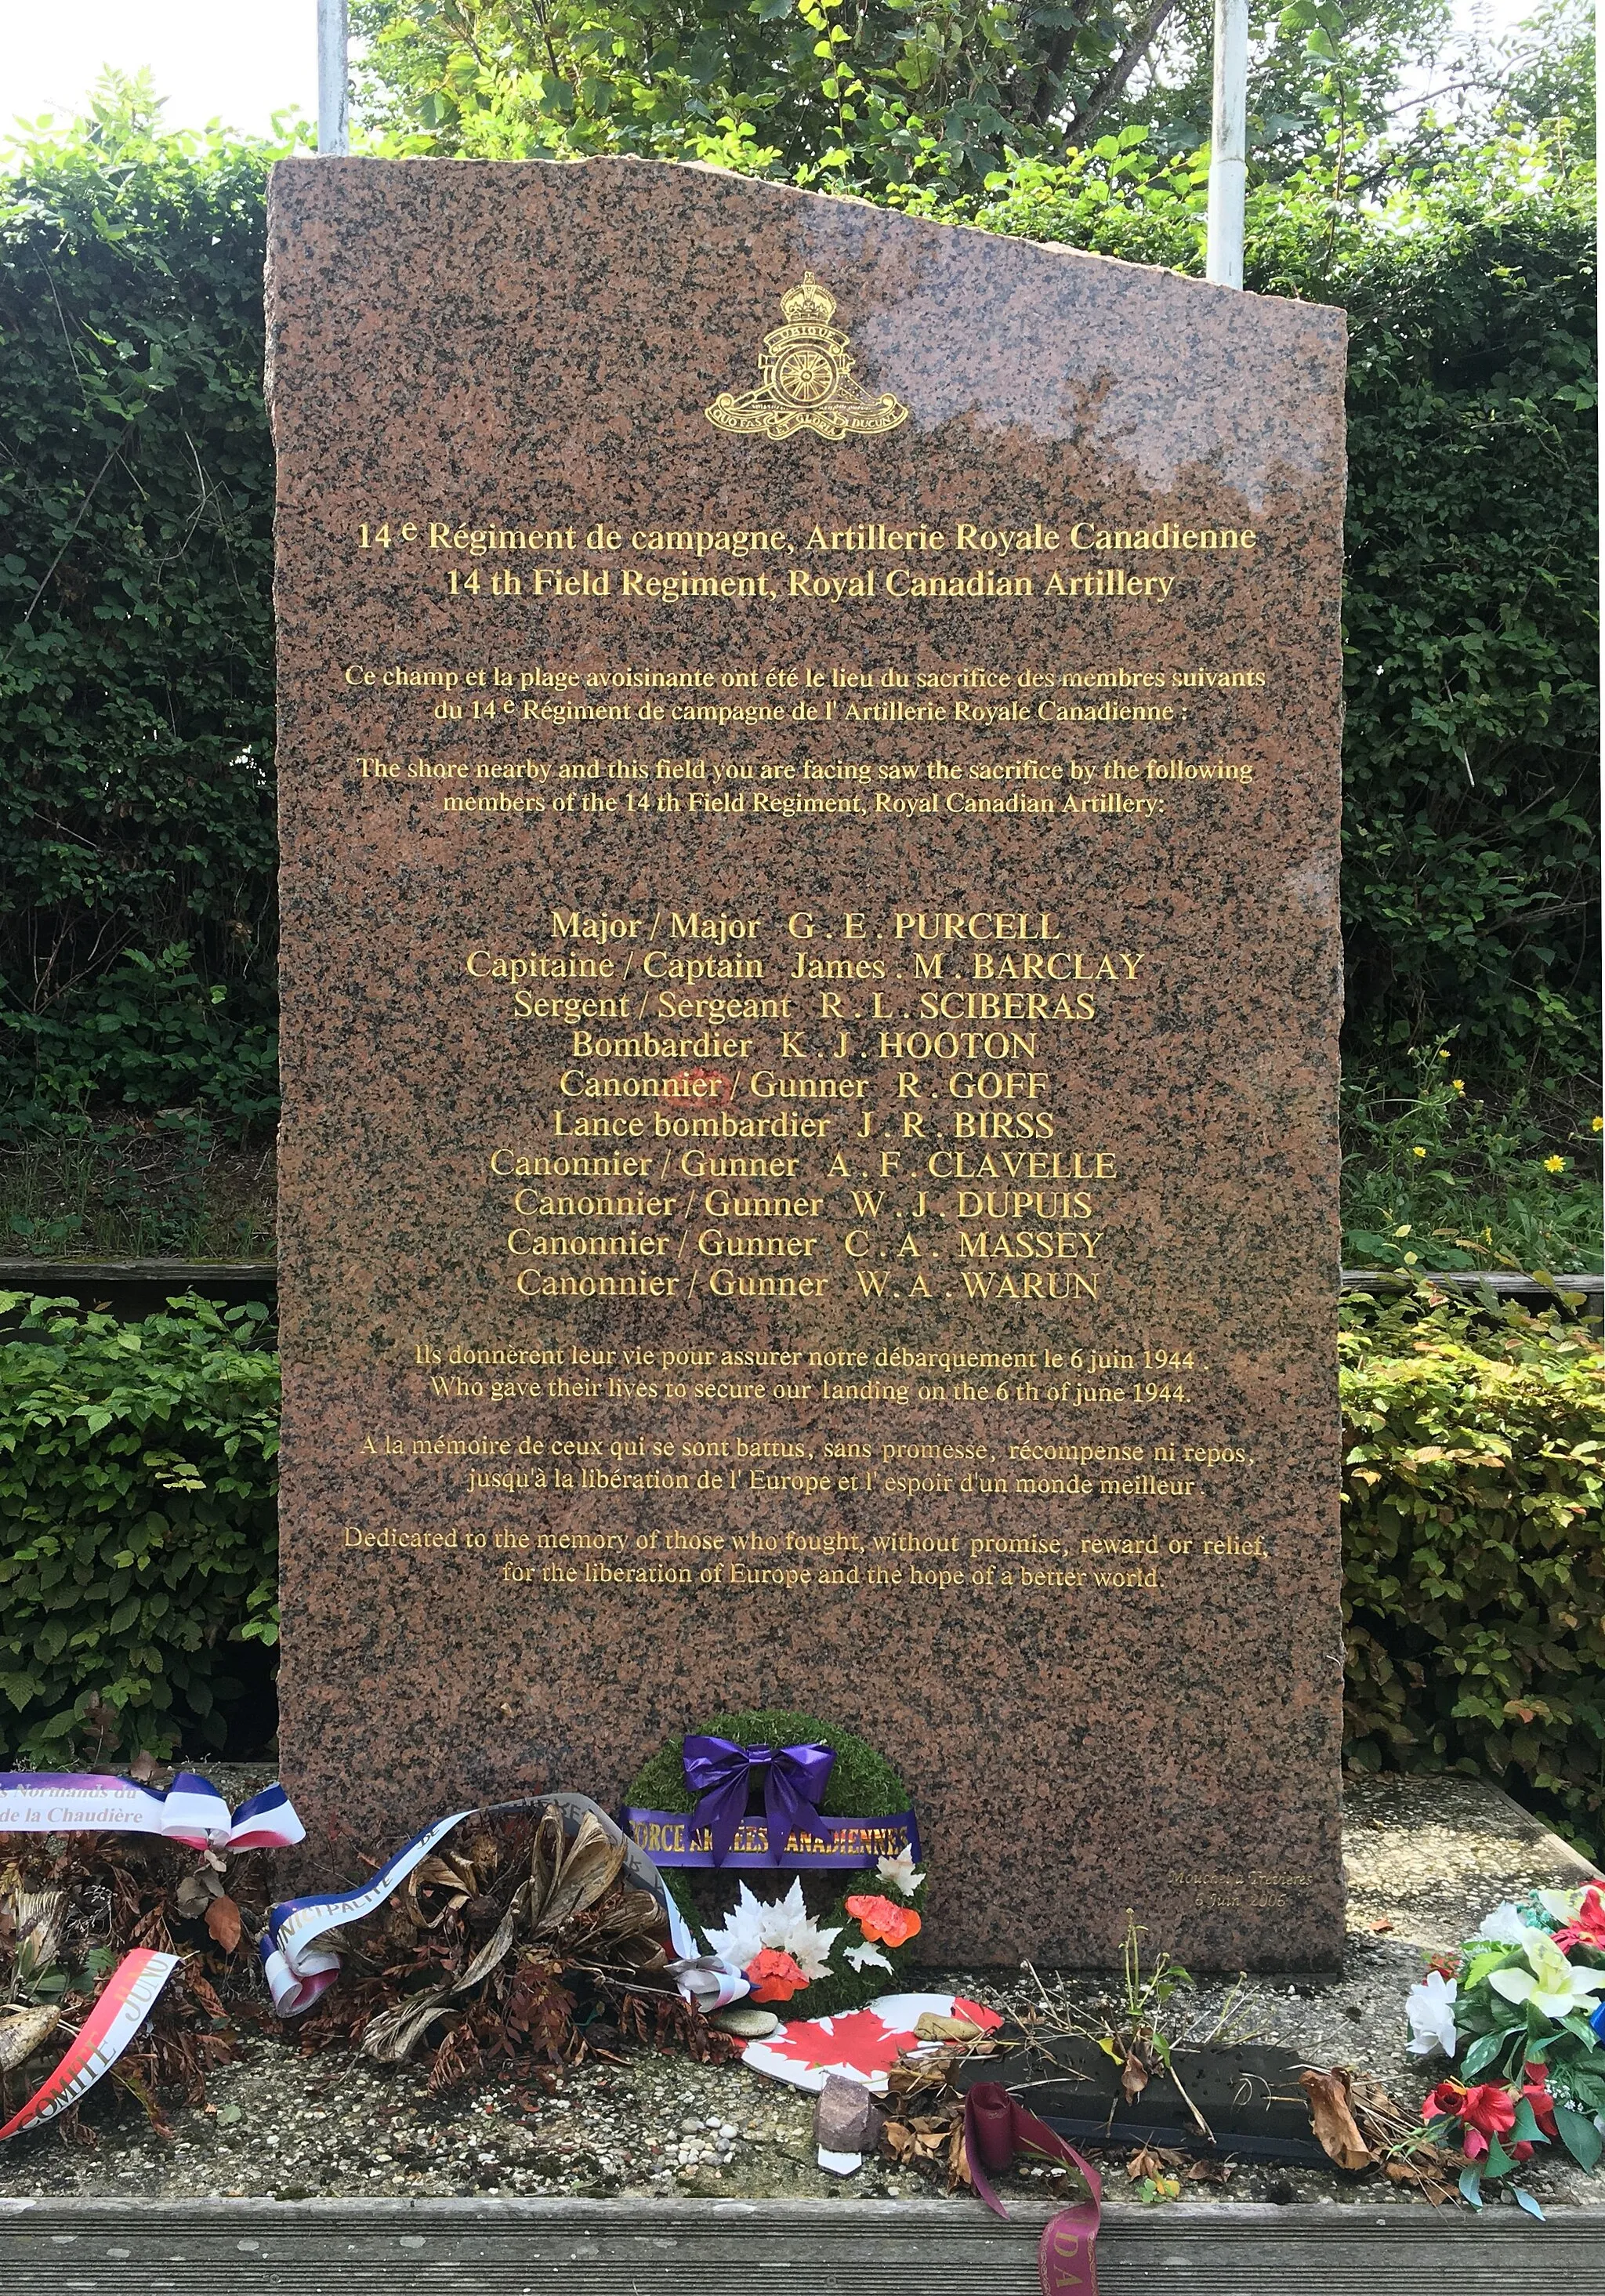 Photo showing: In memory of soldiers from the 14th Field Regiment, Royal Canadian Artillery, fallen during the landing on 6th June 1944